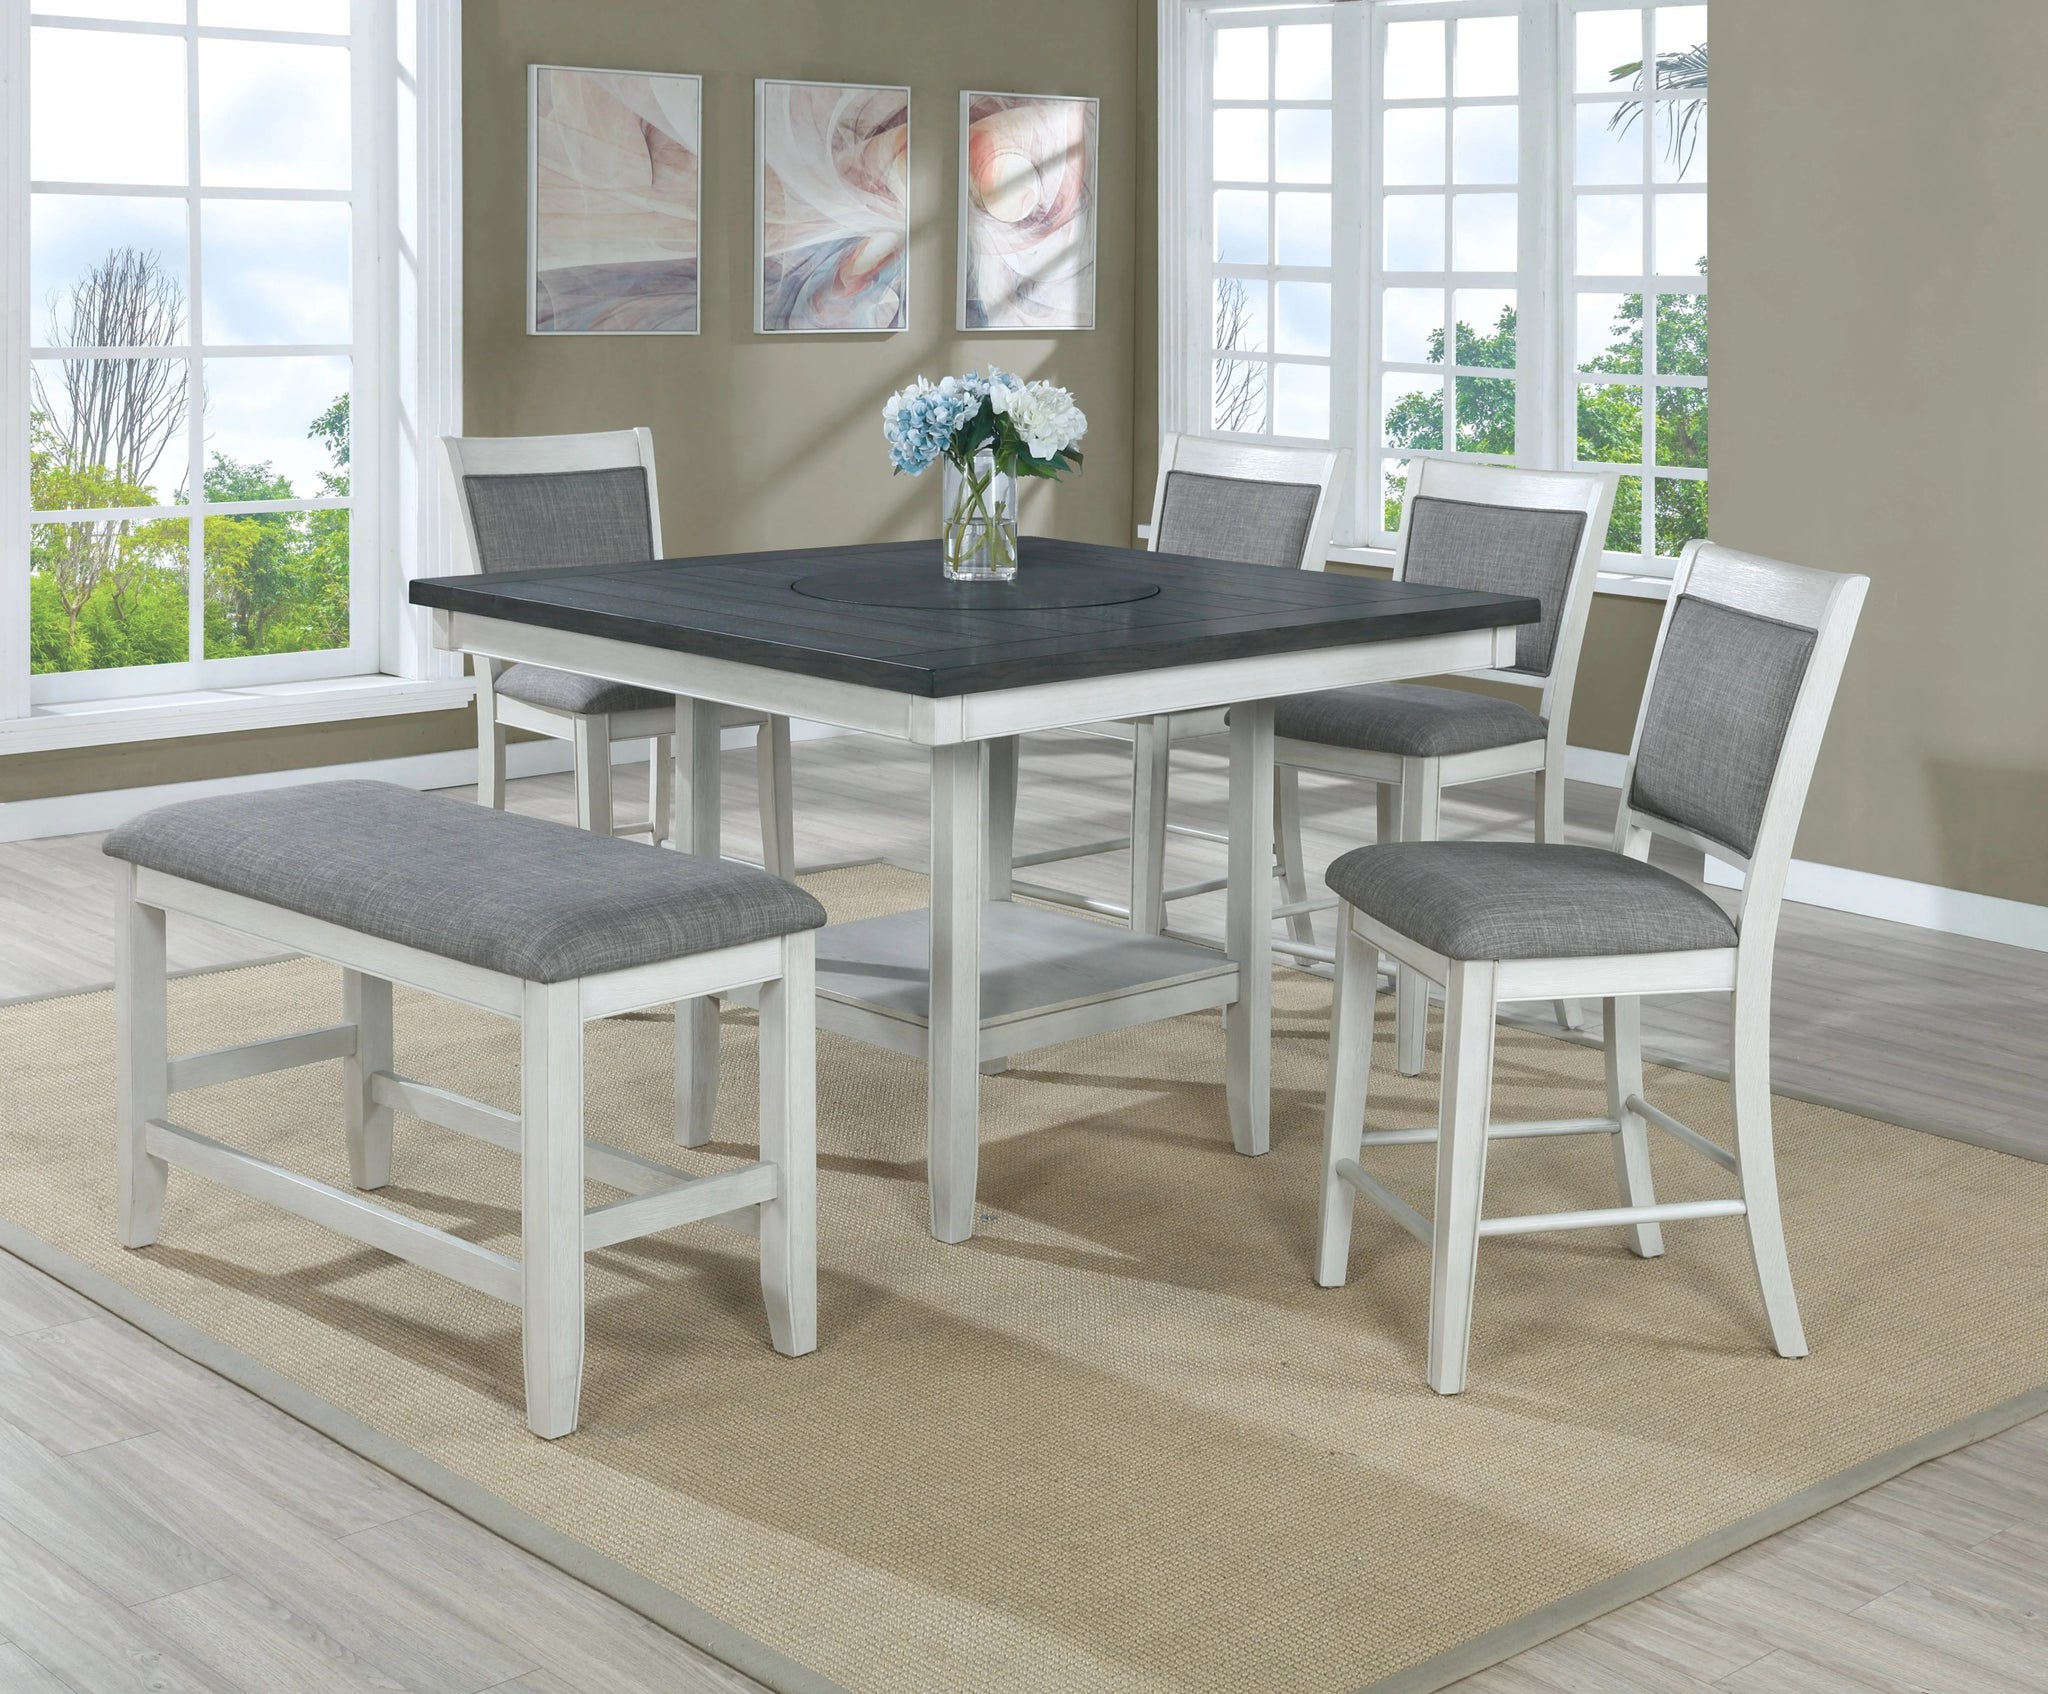 6pc Dining Set Contemporary Farmhouse Style Counter upholstered chair-wood-antique white+gray-seats